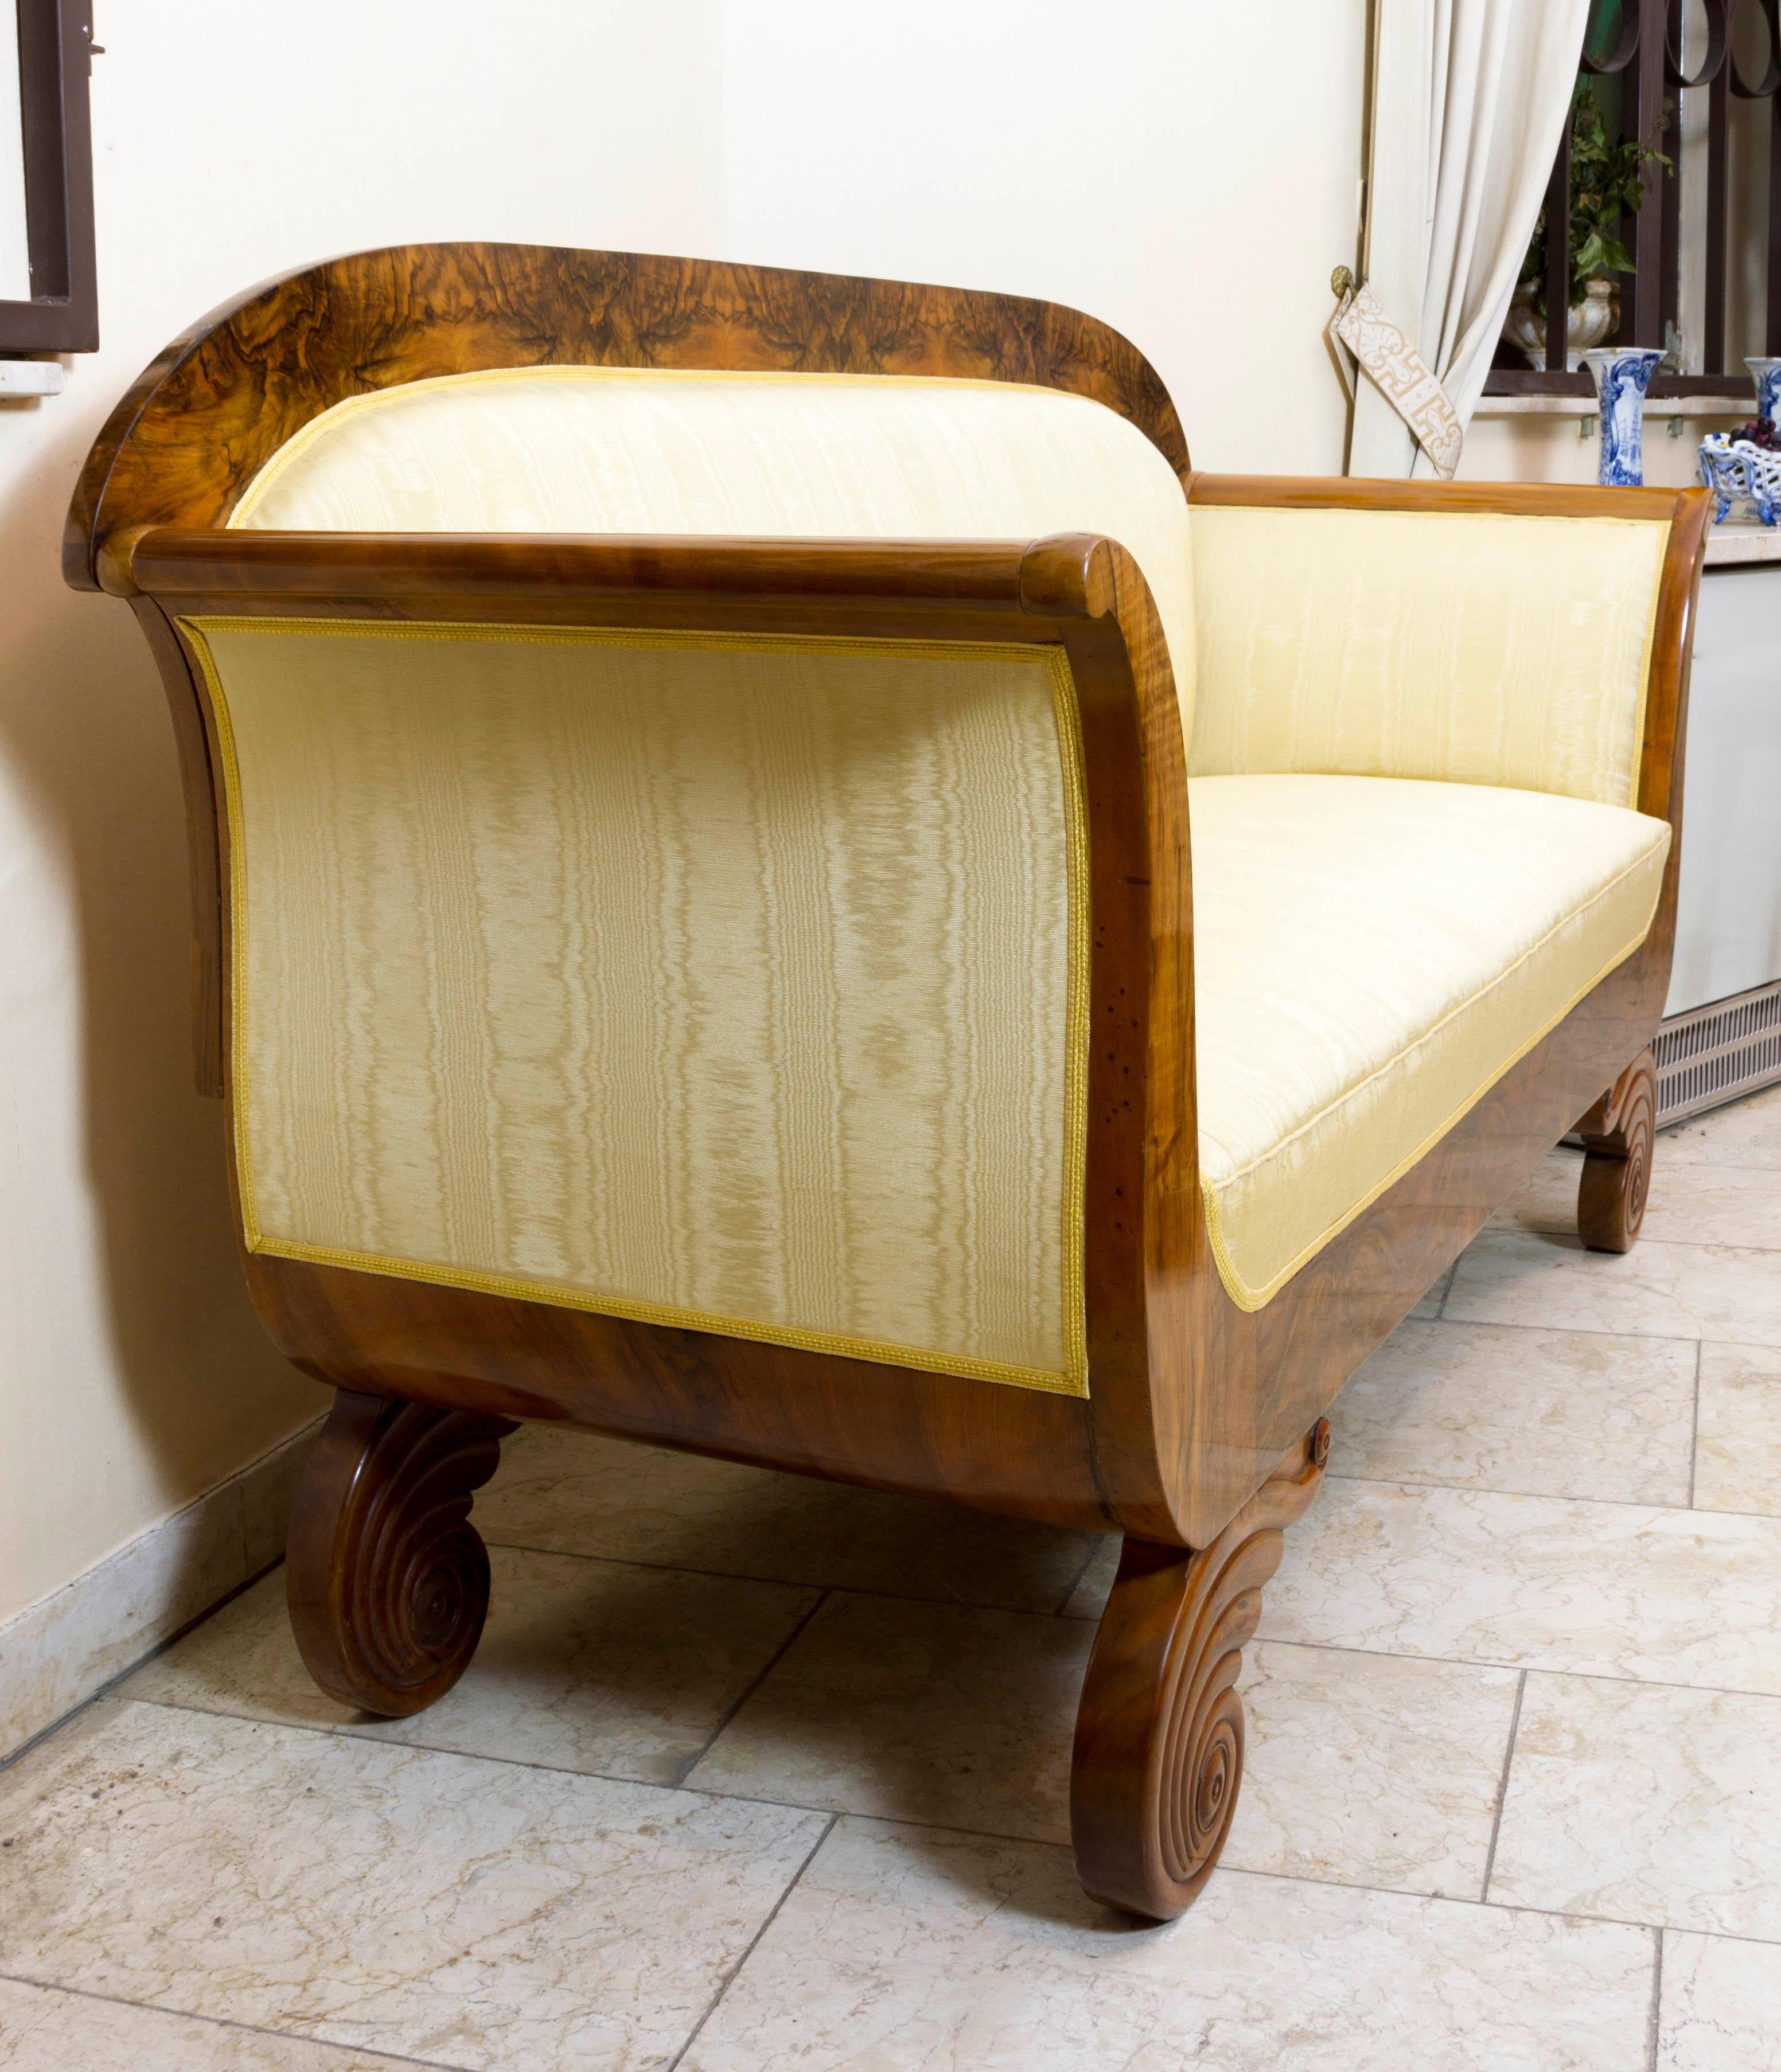 2-Seater 

Burl Walnut veneered. Flat frame on profiled volute feet, bowed armrests.
Seat, armrests and back newly upholstered with yellow gold-colored moirée

height 95 cm, seat height 48 cm, width 172 cm, depth 62 cm

